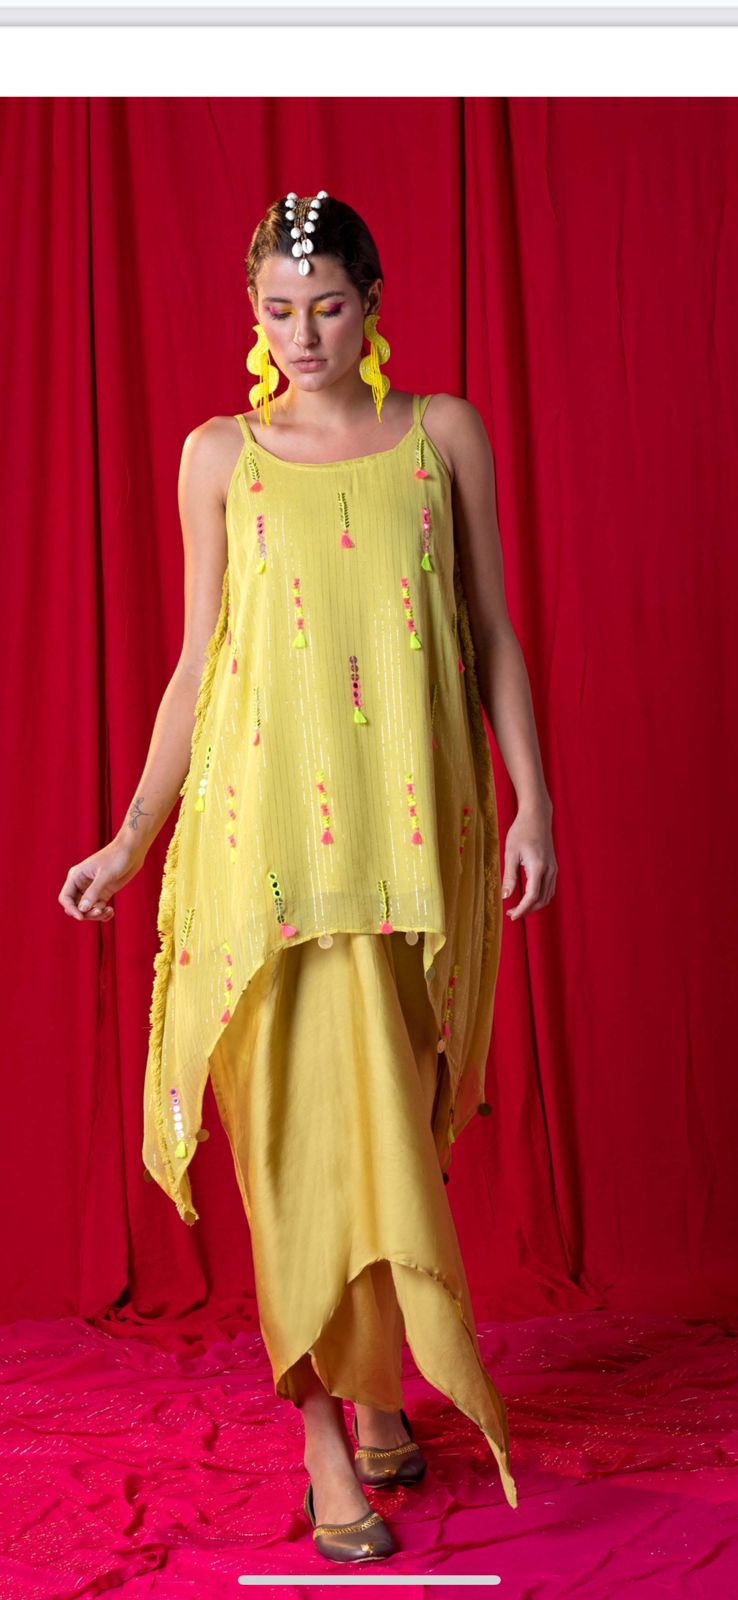 Image of This stylish Yellow Spaghetti Tunic Twin Set is perfect for making a statement. Expertly crafted from a lightweight, airy fabric and embellished with mirror details and multi-color tassels, this look is complete with a draped skirt. A truly unique and fashionable ensemble.  From savoirfashions.com